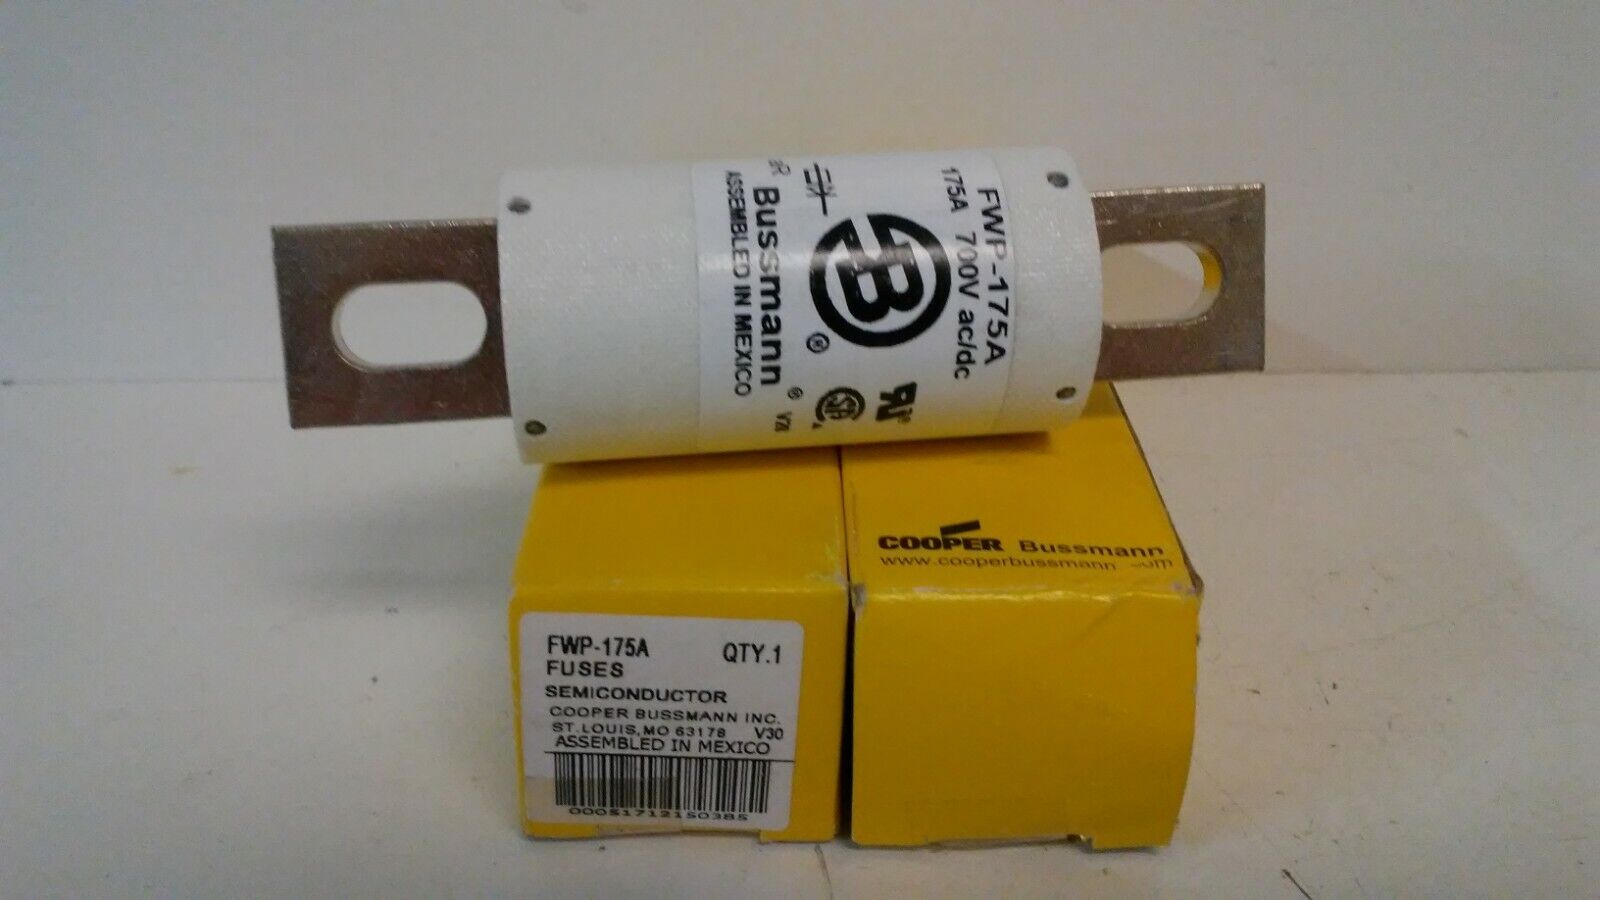 LOT OF (2) NEW IN BOX COOPER BUSSMANN 175A SEMICONDUCTOR FUSES FWP-175A